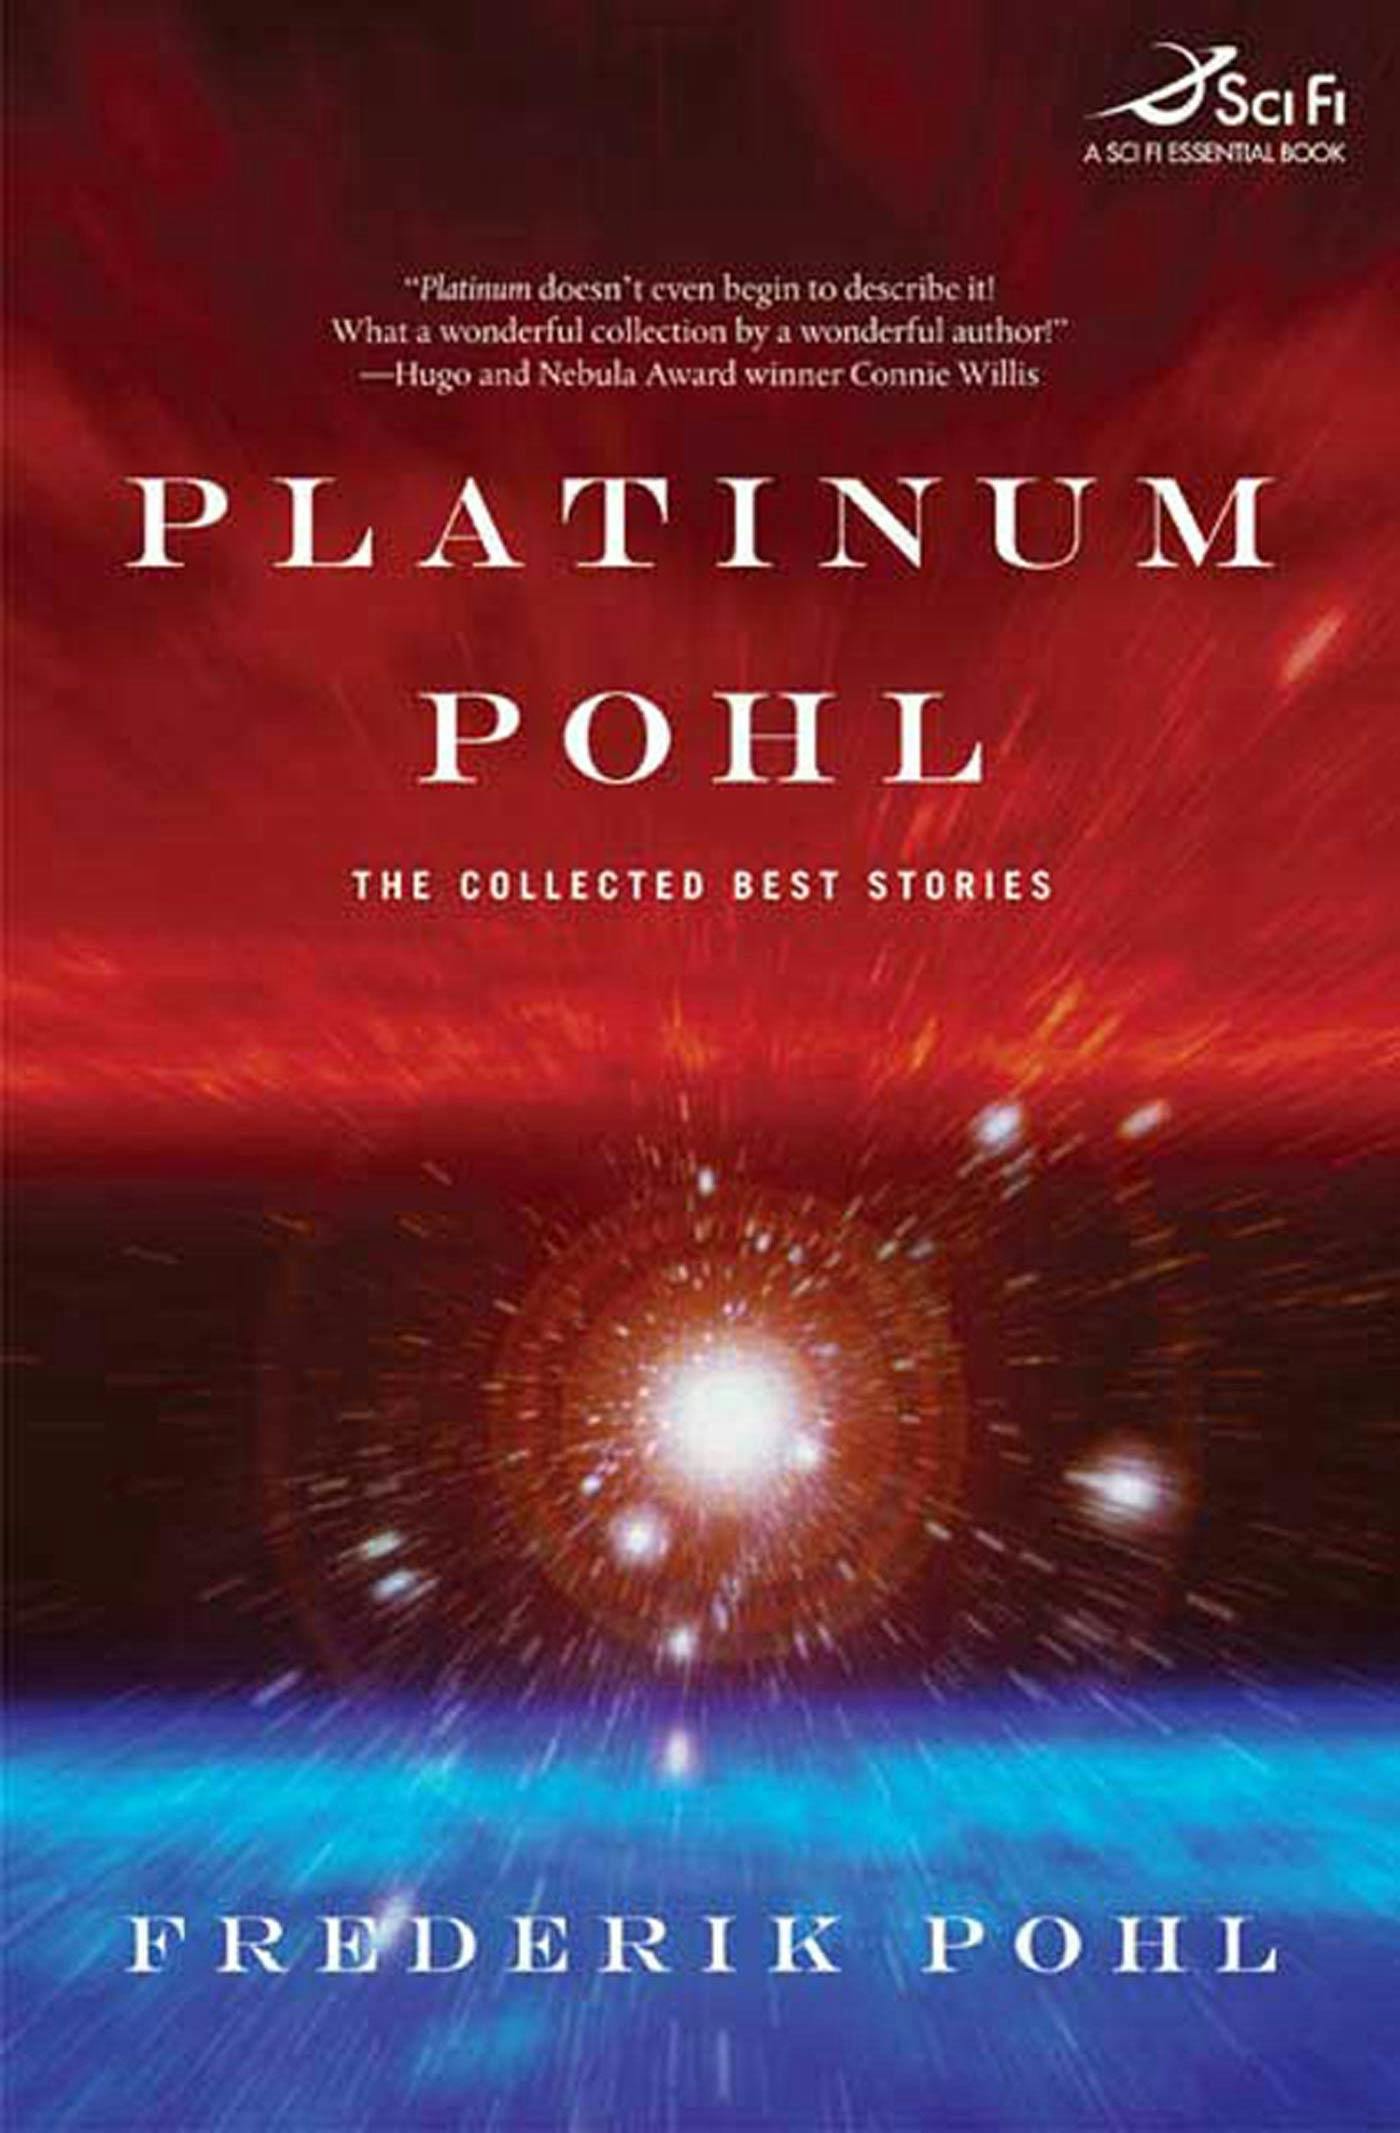 Cover for the book titled as: Platinum Pohl